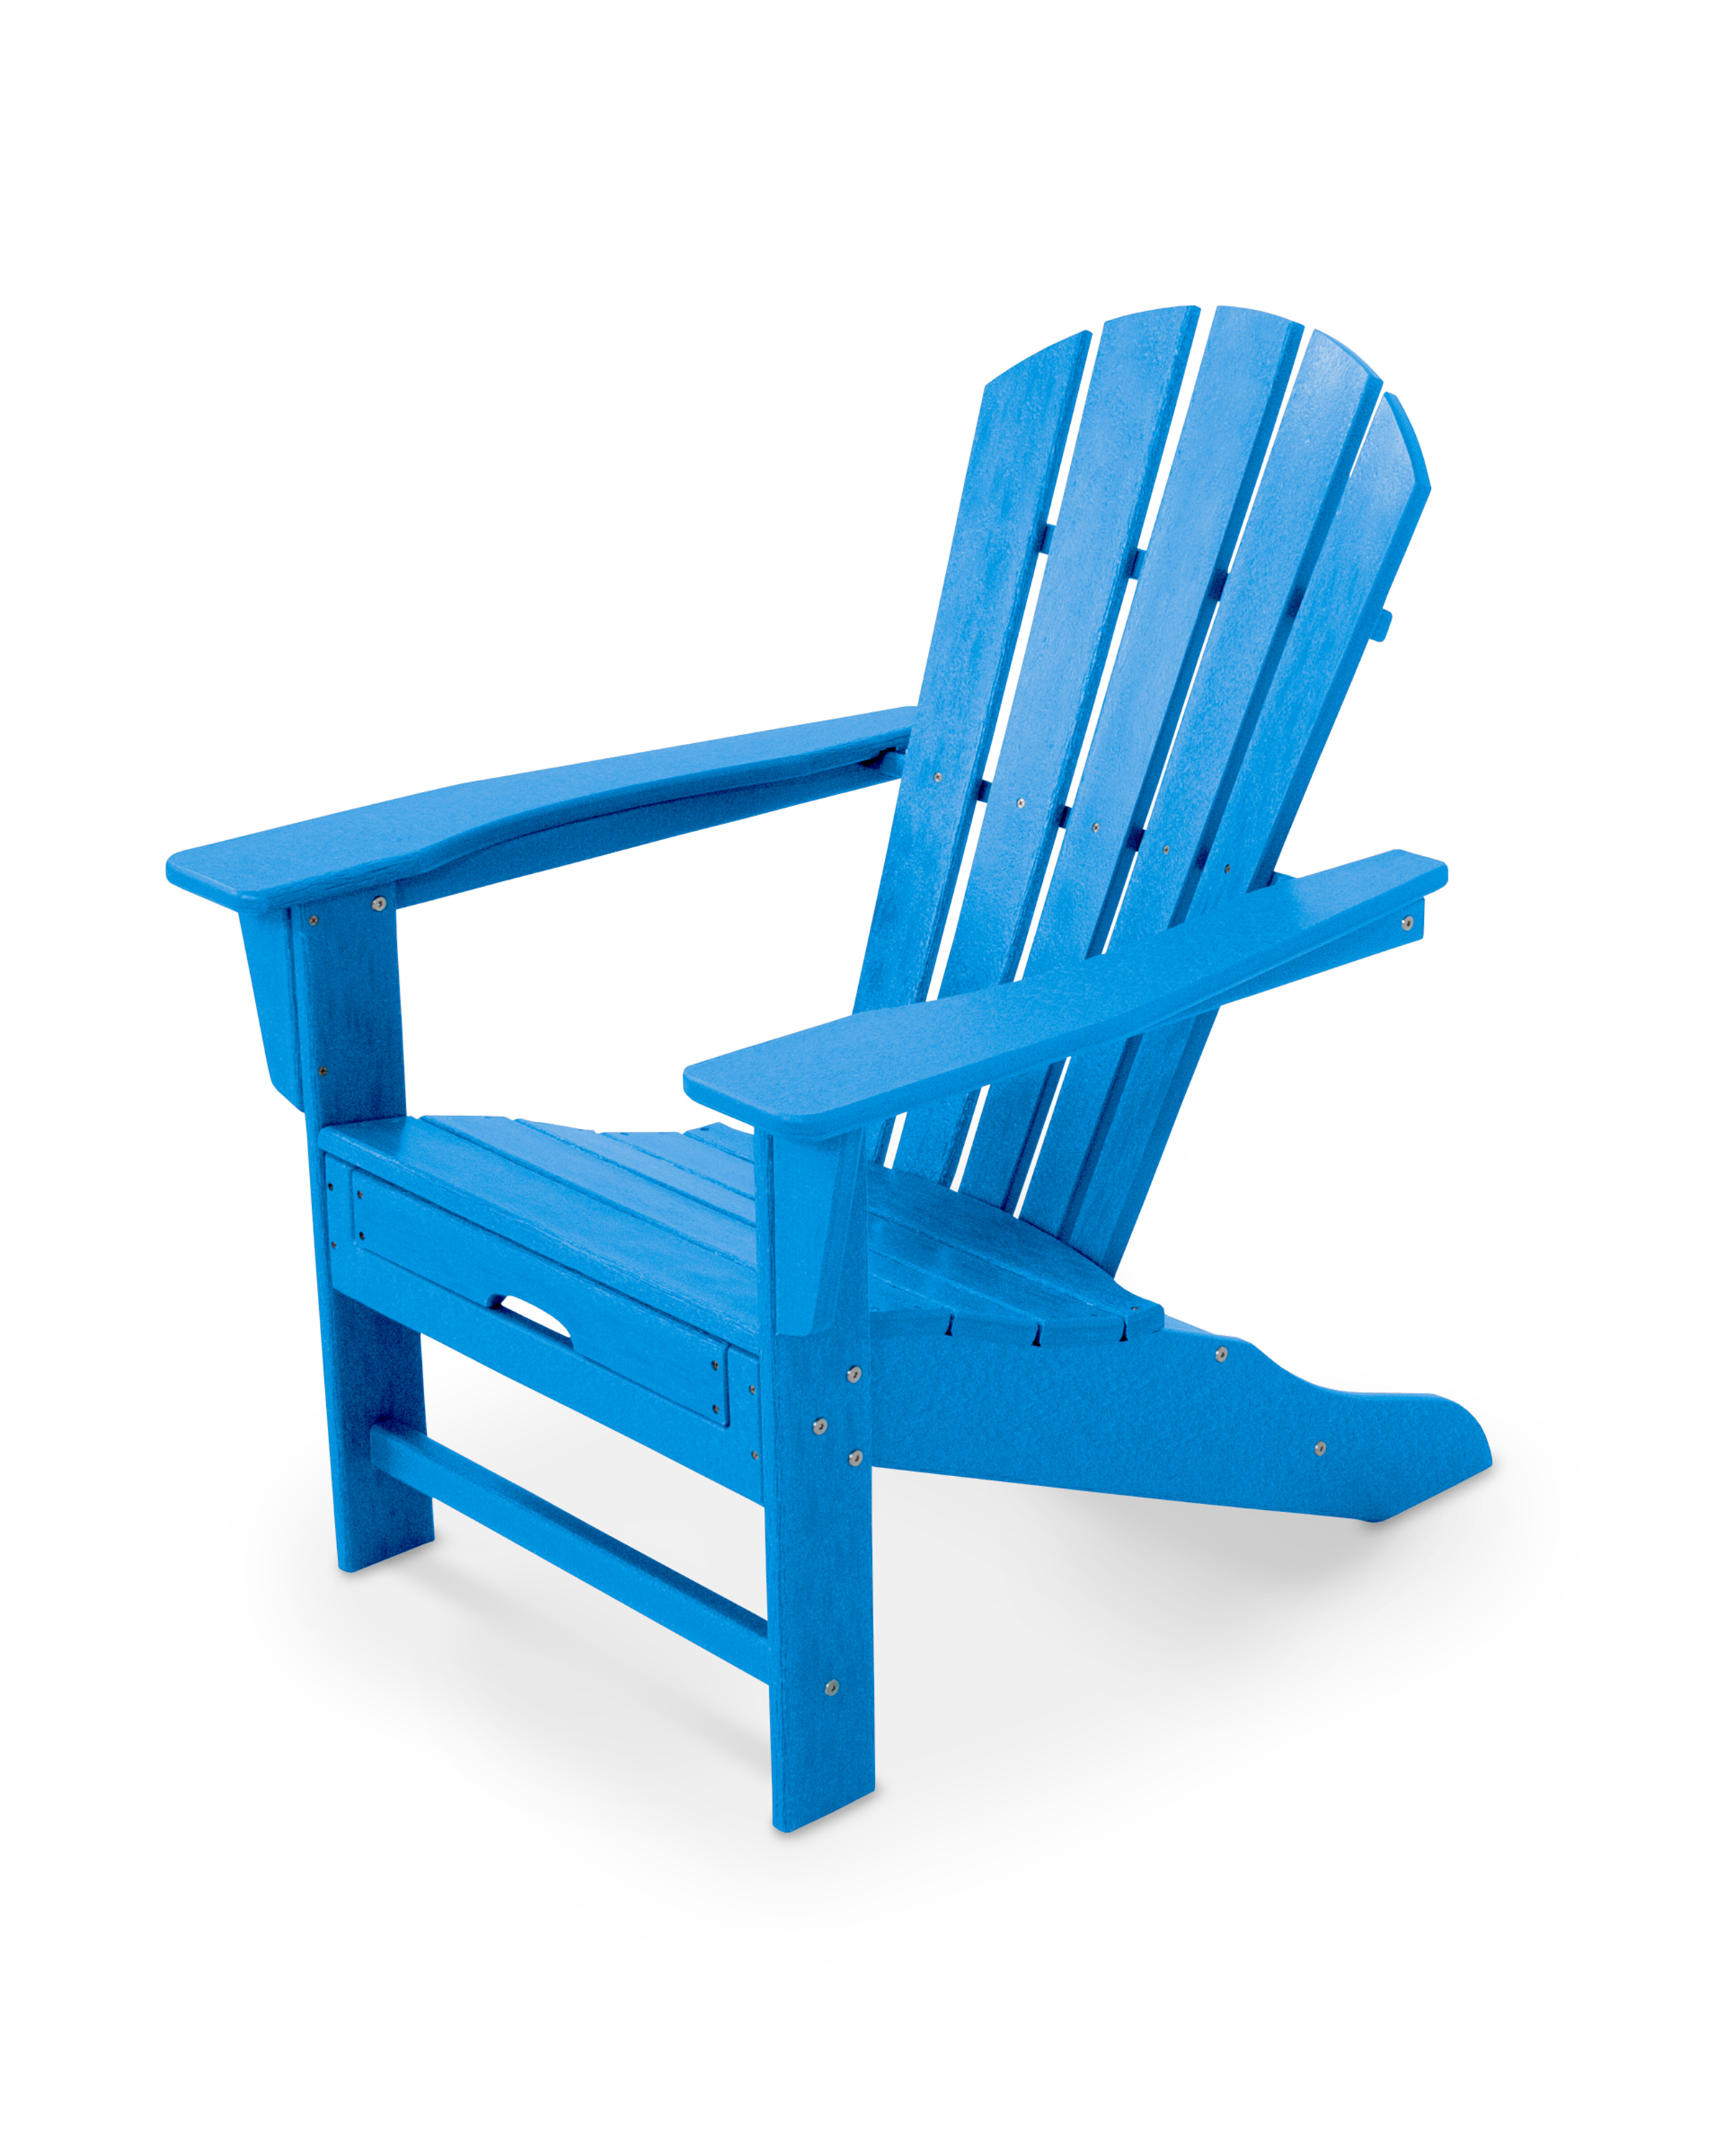 palm coast ultimate adirondack with hideaway ottoman in pacific blue thumbnail image